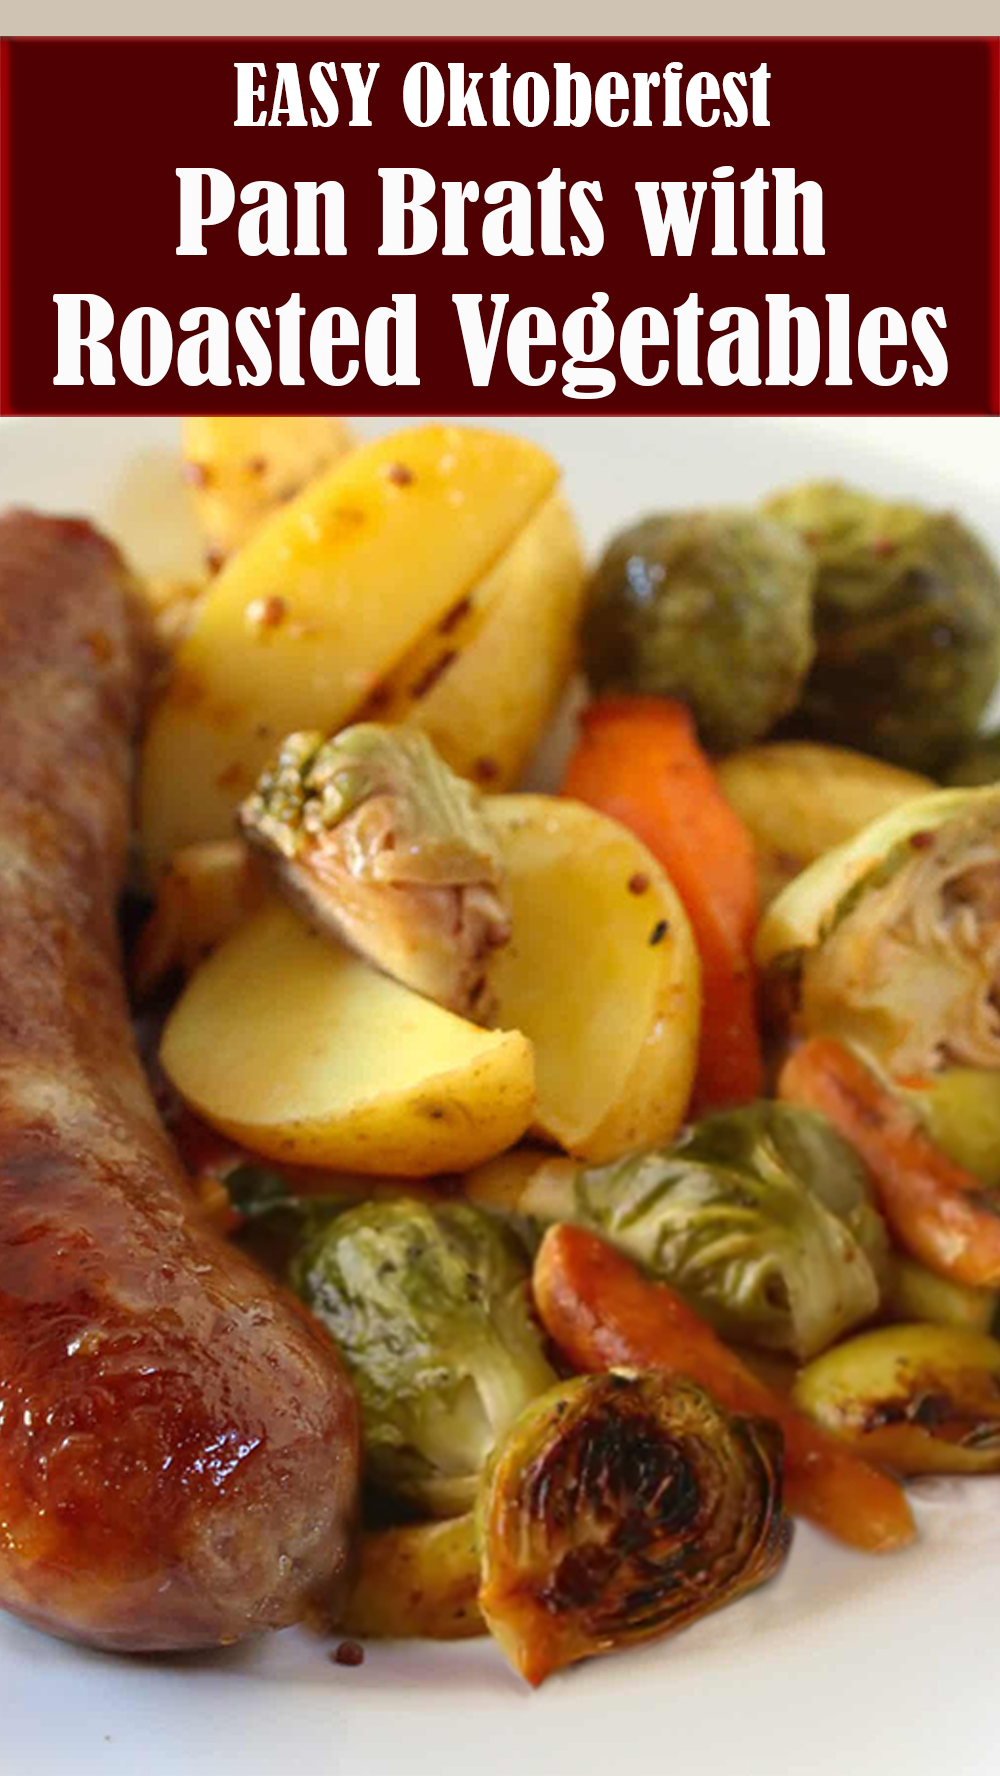 Easy Oktoberfest Sheet Pan Brats with Roasted Vegetables